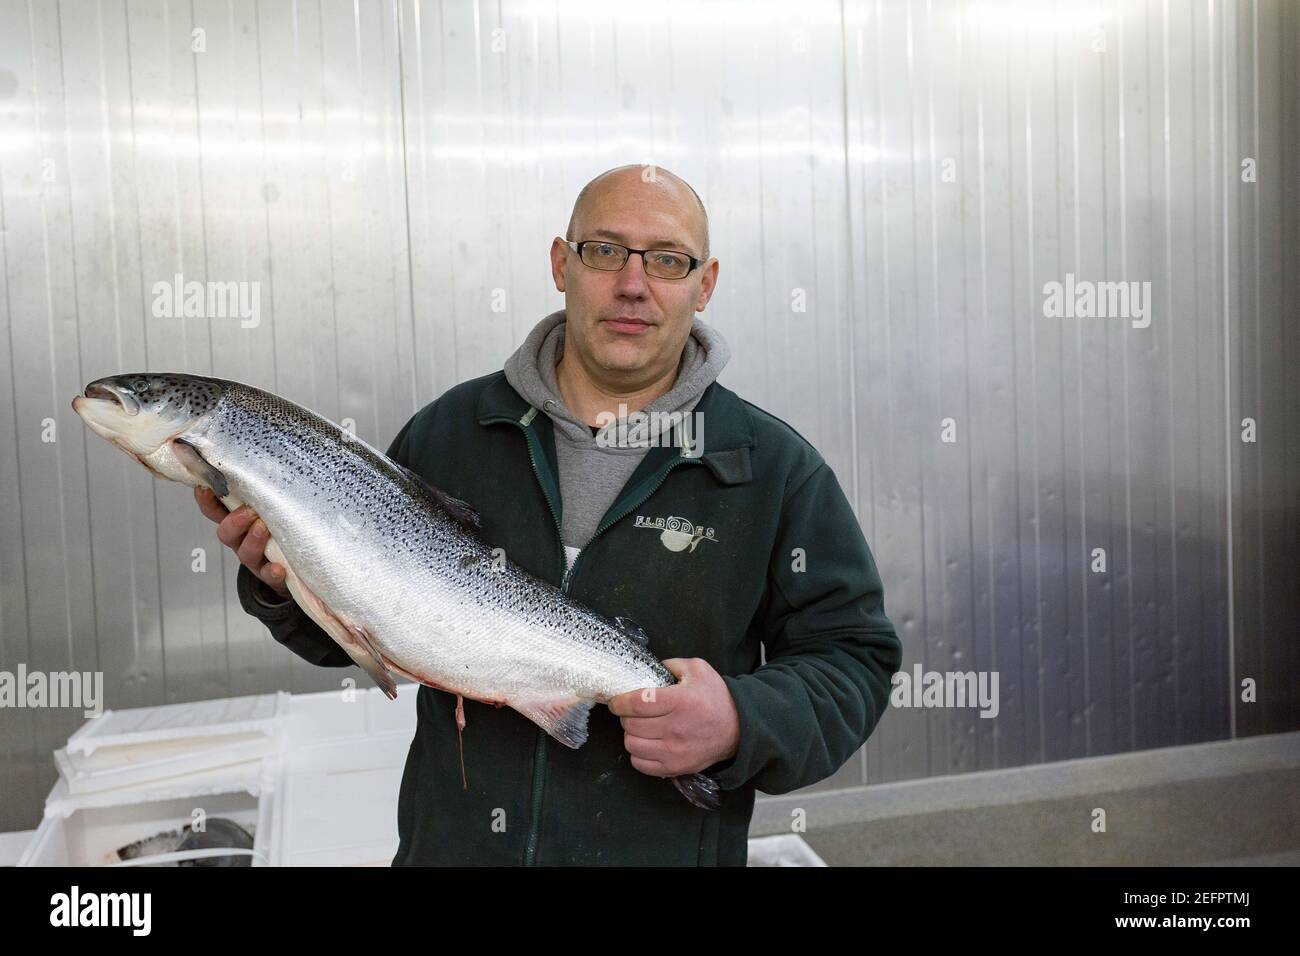 Fishmonger holding a big Atlantic salmon in his workplace Hanseatic City of Bremen, Germany . Stock Photo